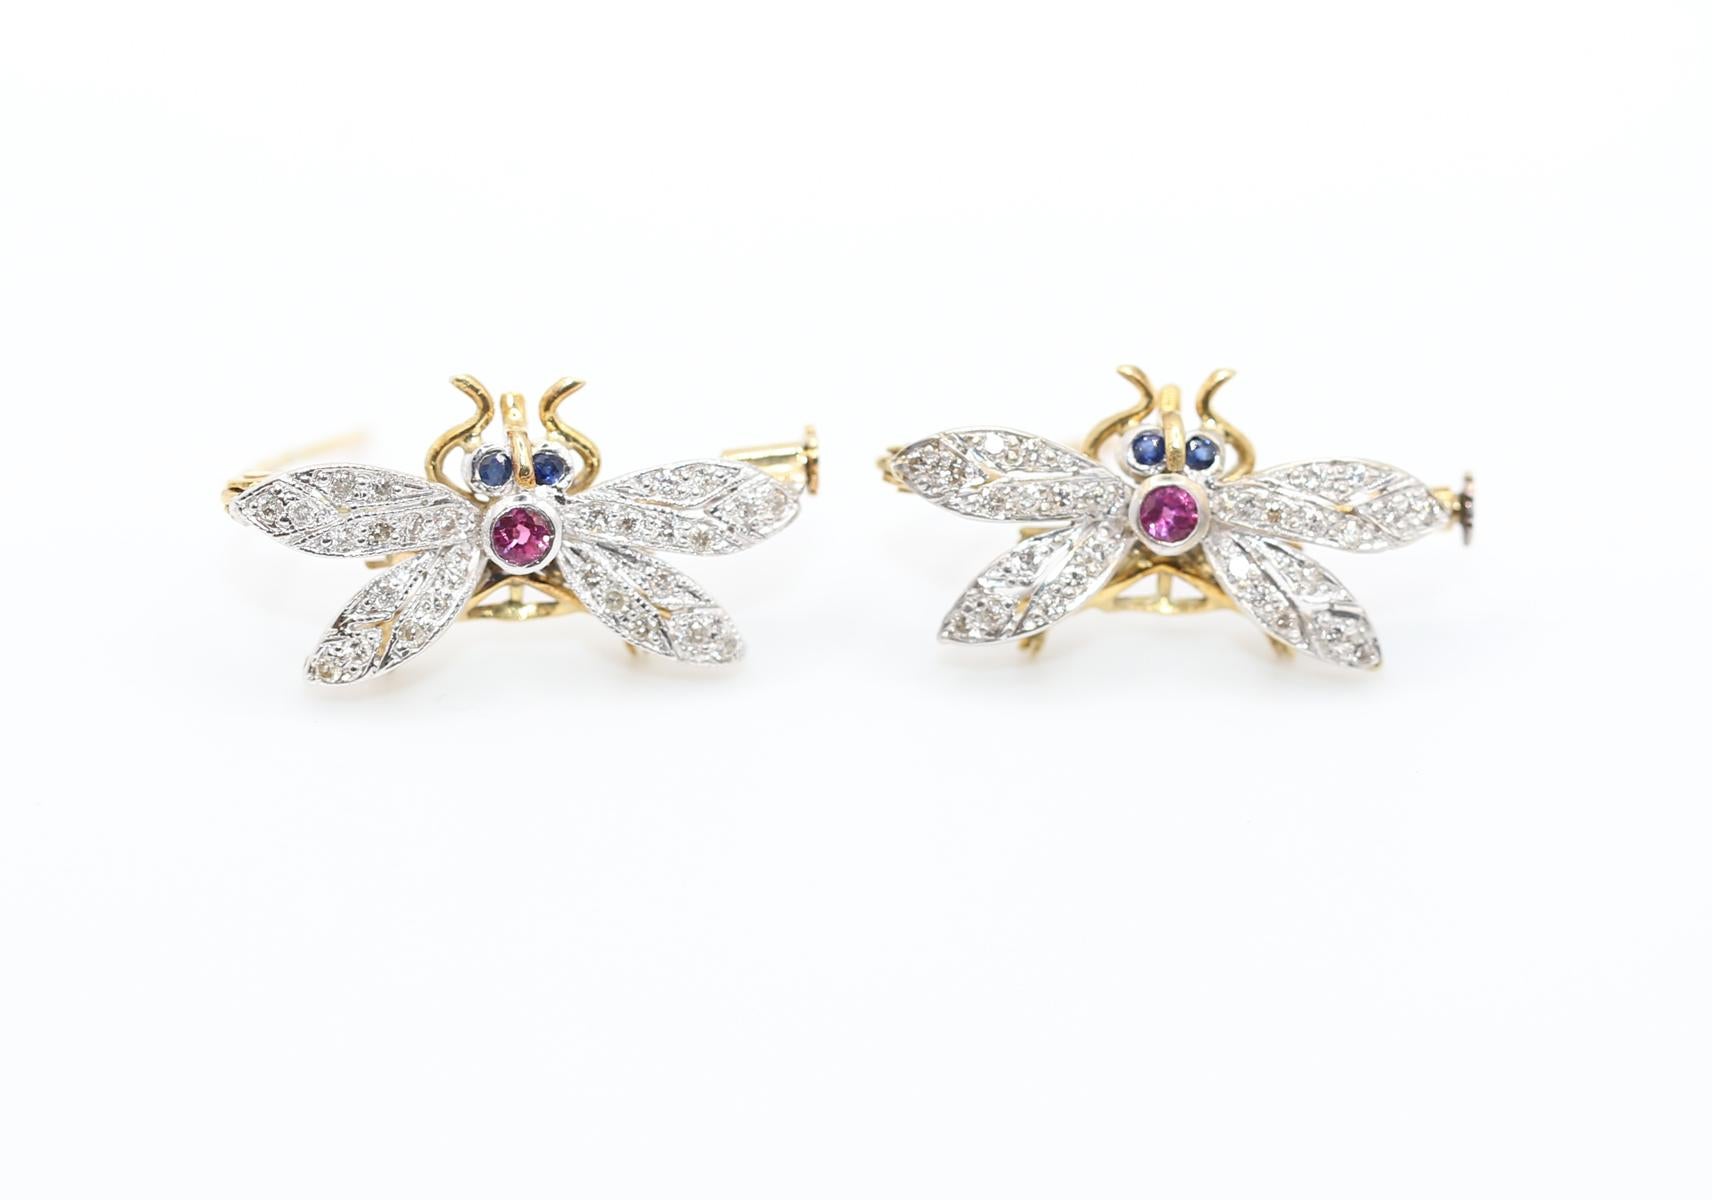 A pair of fine brooches depicting butterflies and set with Diamonds and  Sapphires.

A Magnificent late Victorian diamond-set butterfly brooches, the brooches in the form of a butterfly, the body, and pierced wings set throughout with old brilliant-